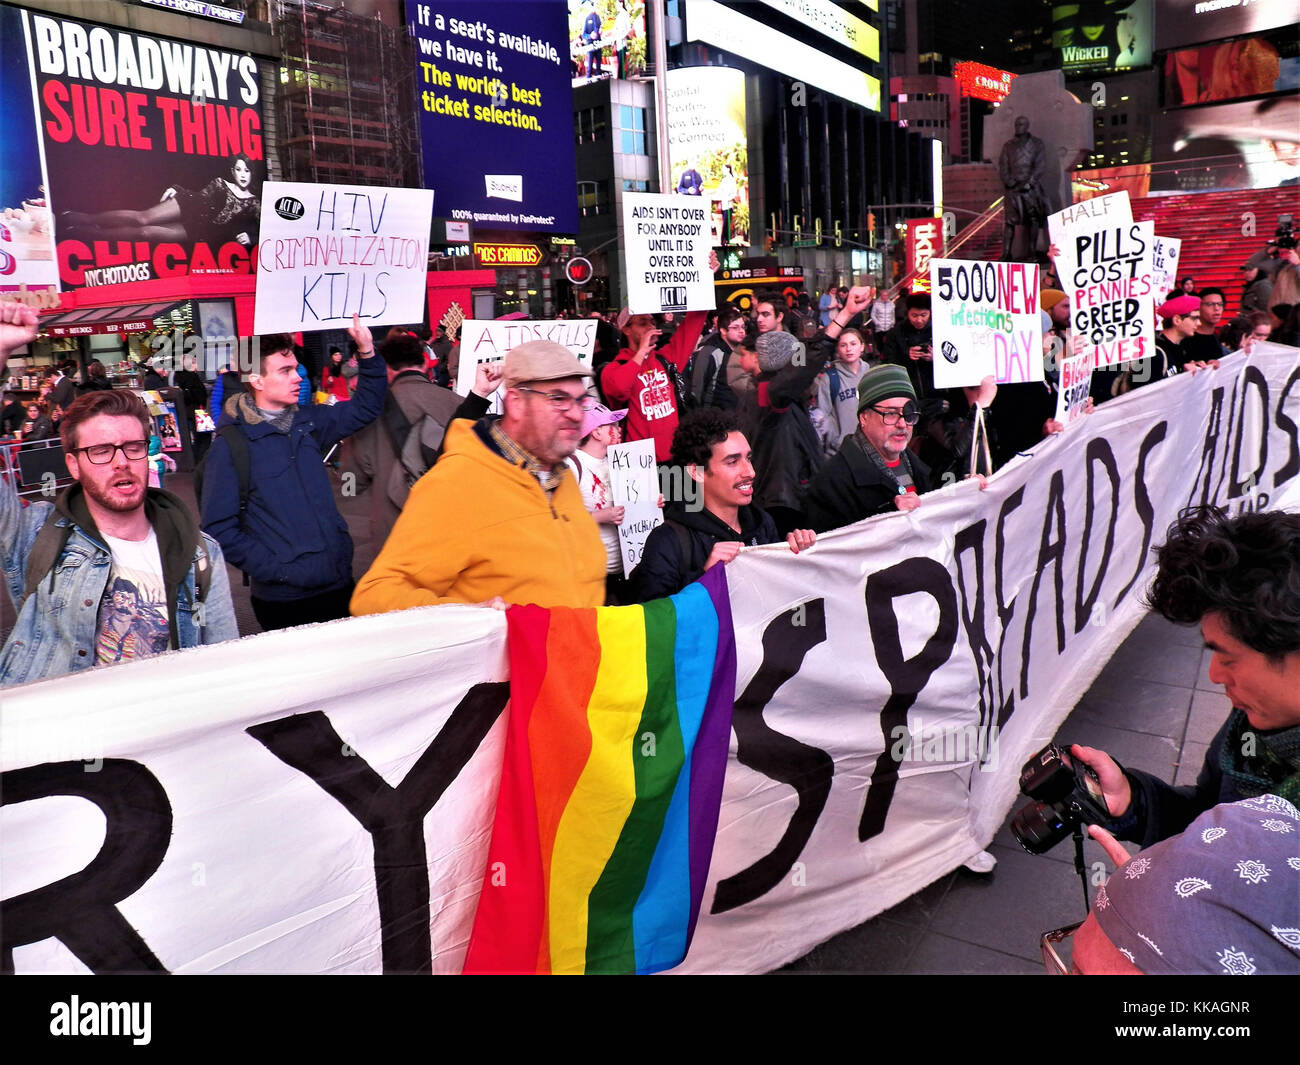 New York City, 29th November, 2017. Around 100 people turned out tonight in Time Square New York City, for "WAD: We Are Dying (Still)" - a protest prior to World AIDS Day,  organized by ACT-UP NYC. Credit: Mark Apollo/Alamy Live News Stock Photo